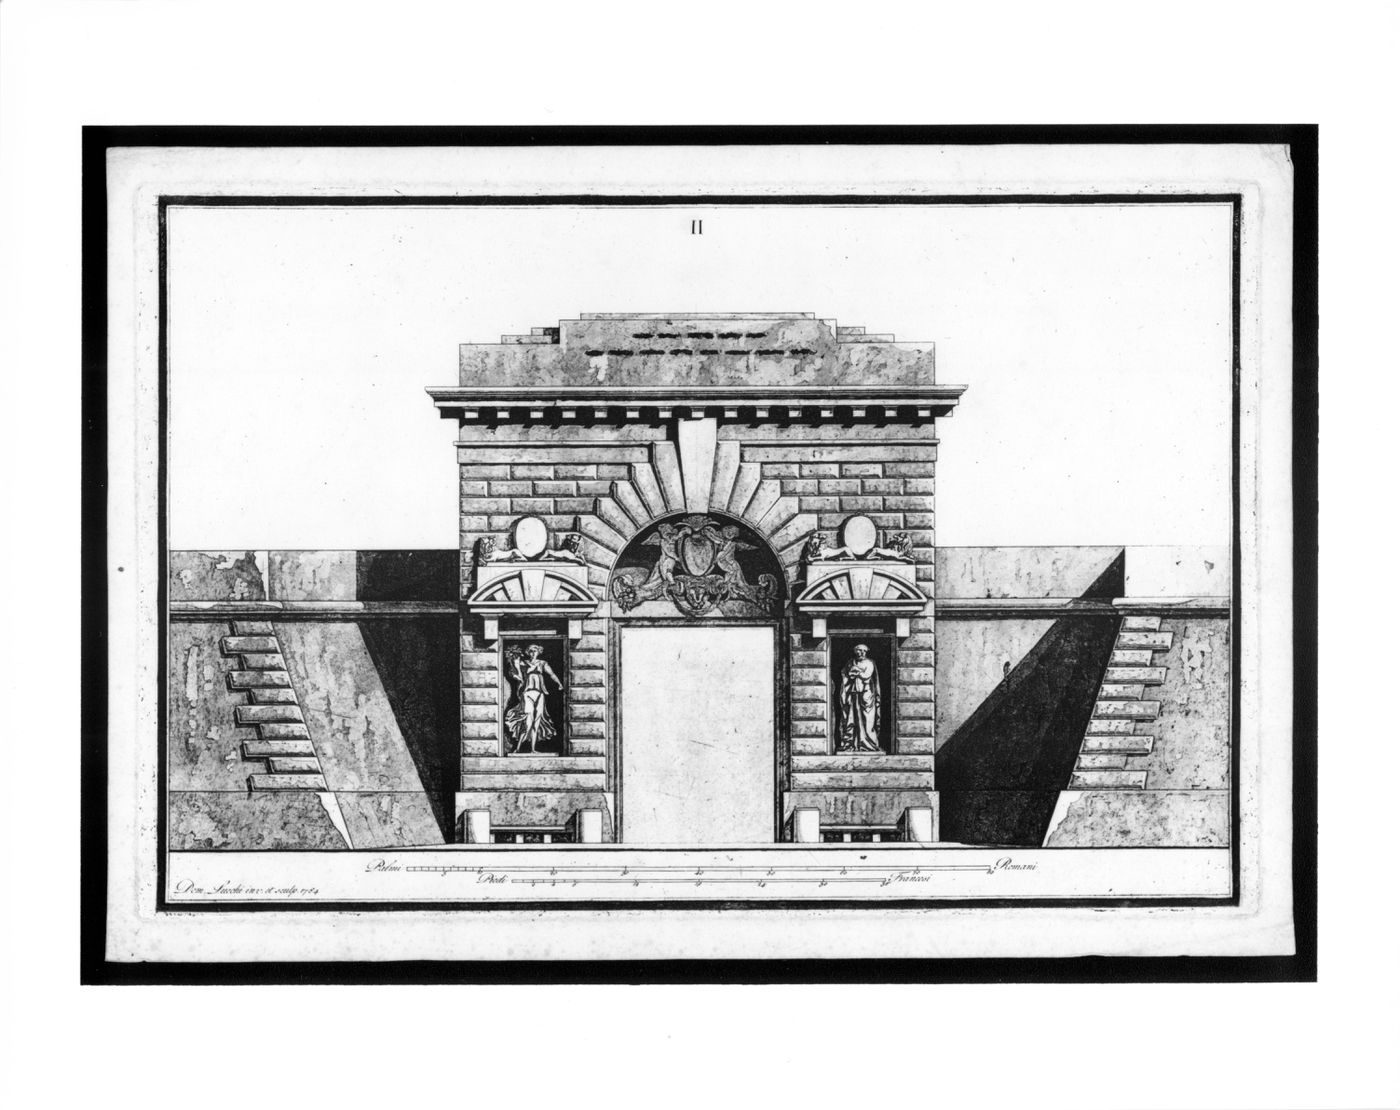 Designs for fortified gates